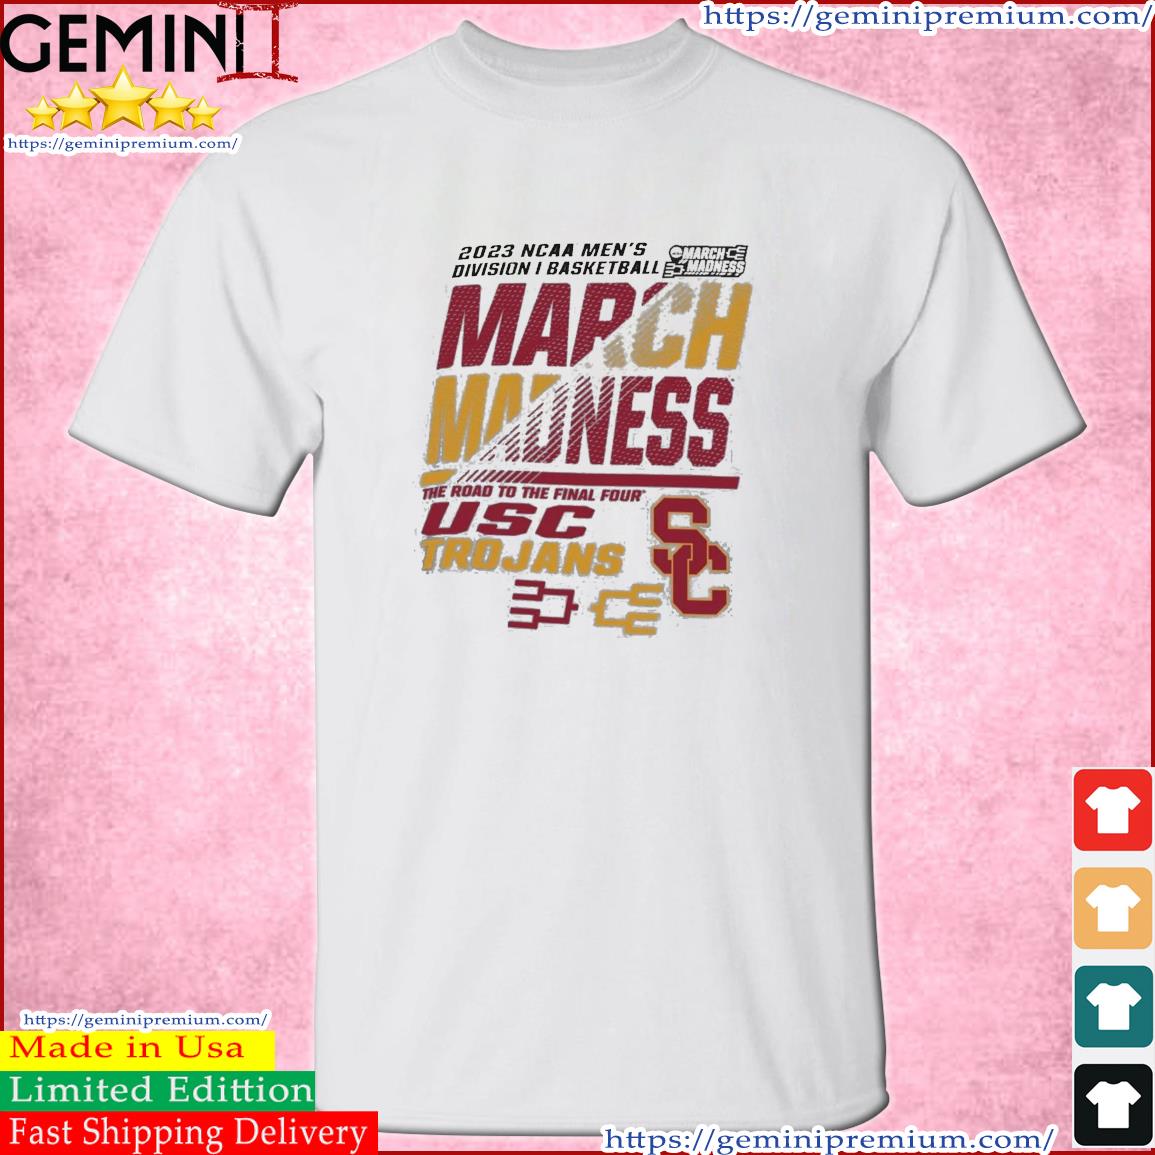 USC Men's Basketball 2023 NCAA March Madness The Road To Final Four Shirt